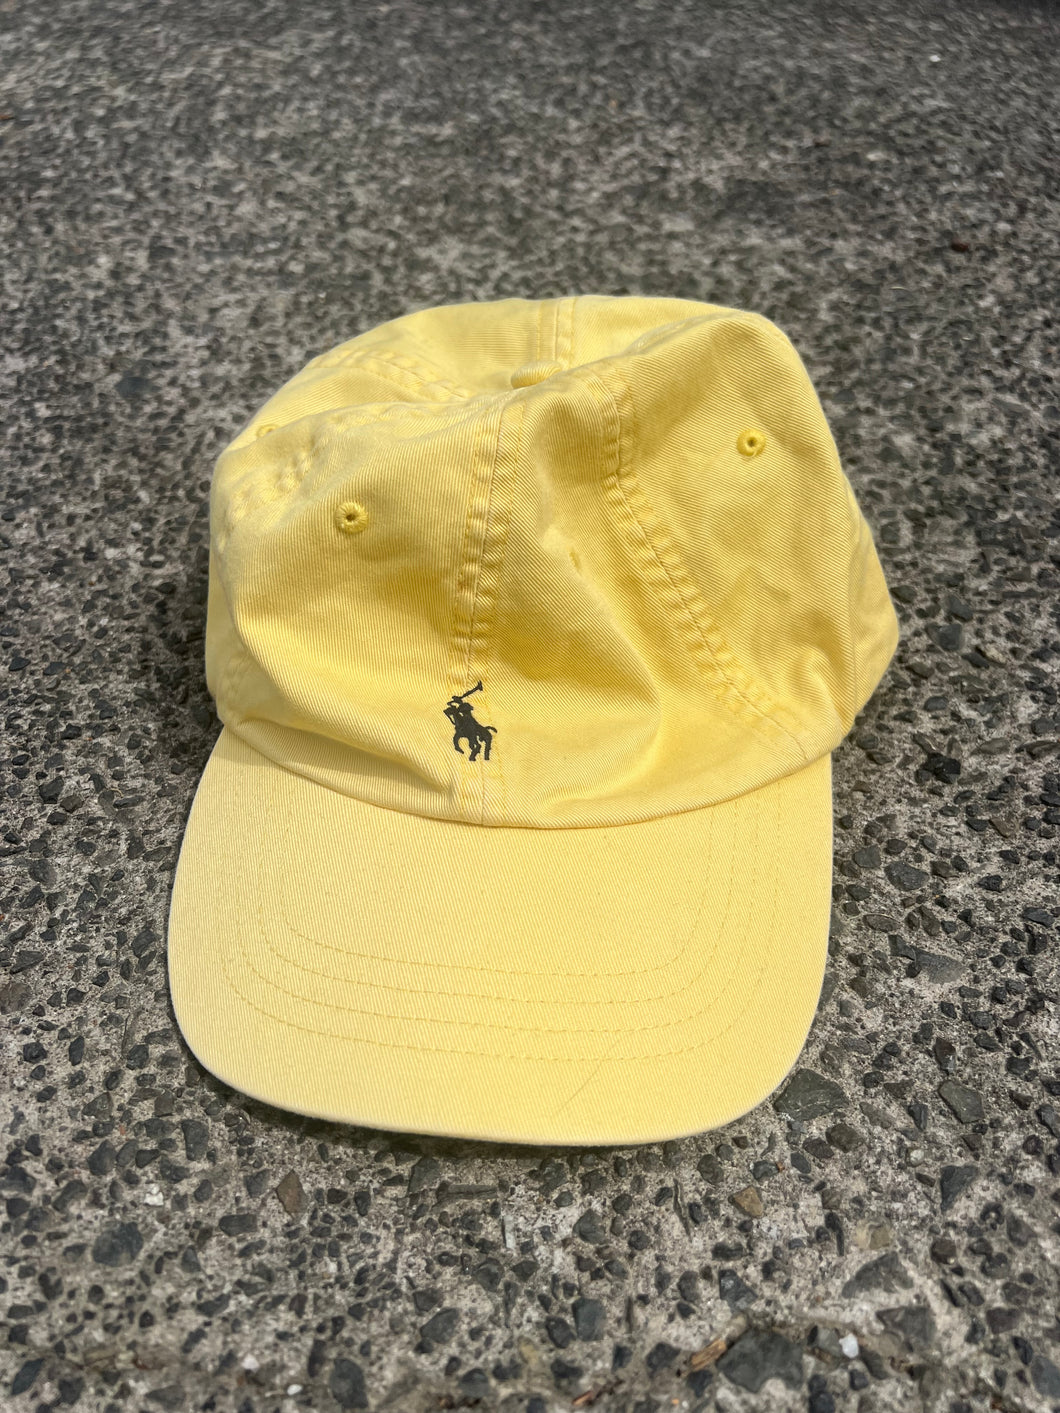 VINTAGE YELLOW RALPH LAUREN POLO HAT - ONE SIZE FITS ALL OSFA